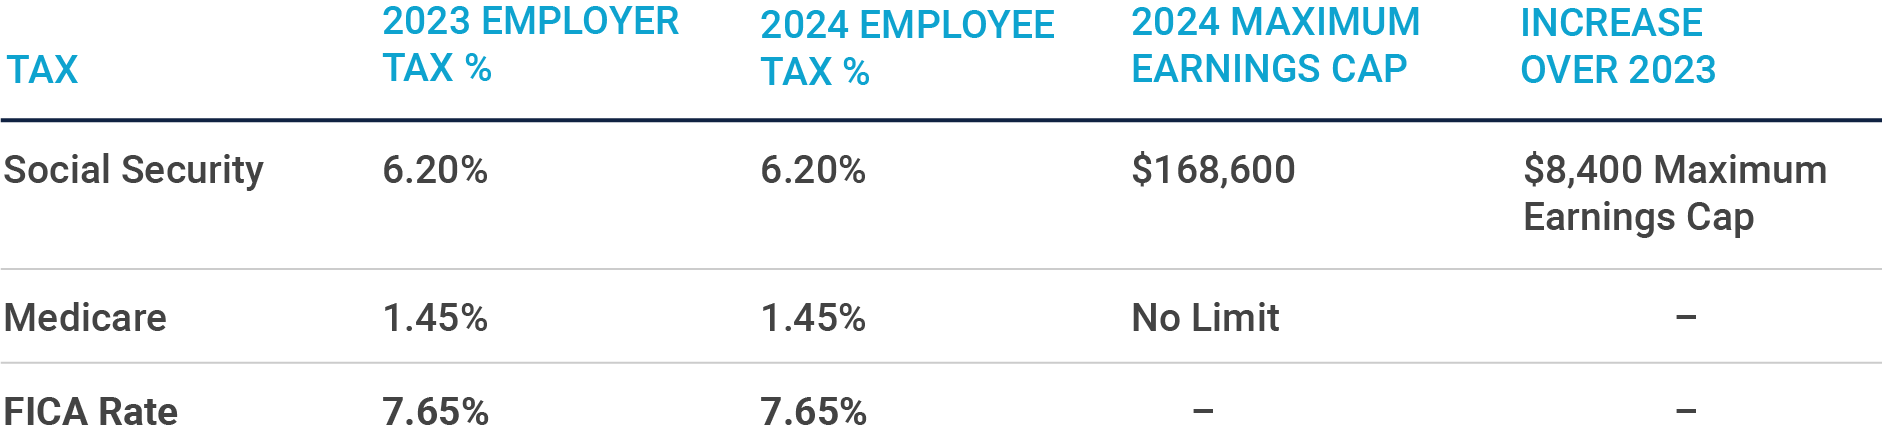 Effective January 1, 2024, the U.S. Social Security Administration will increase the maximum earnings subject to the Social Security payroll tax by $8,400 (from $160,200 in 2023 to $168,600 in 2024).